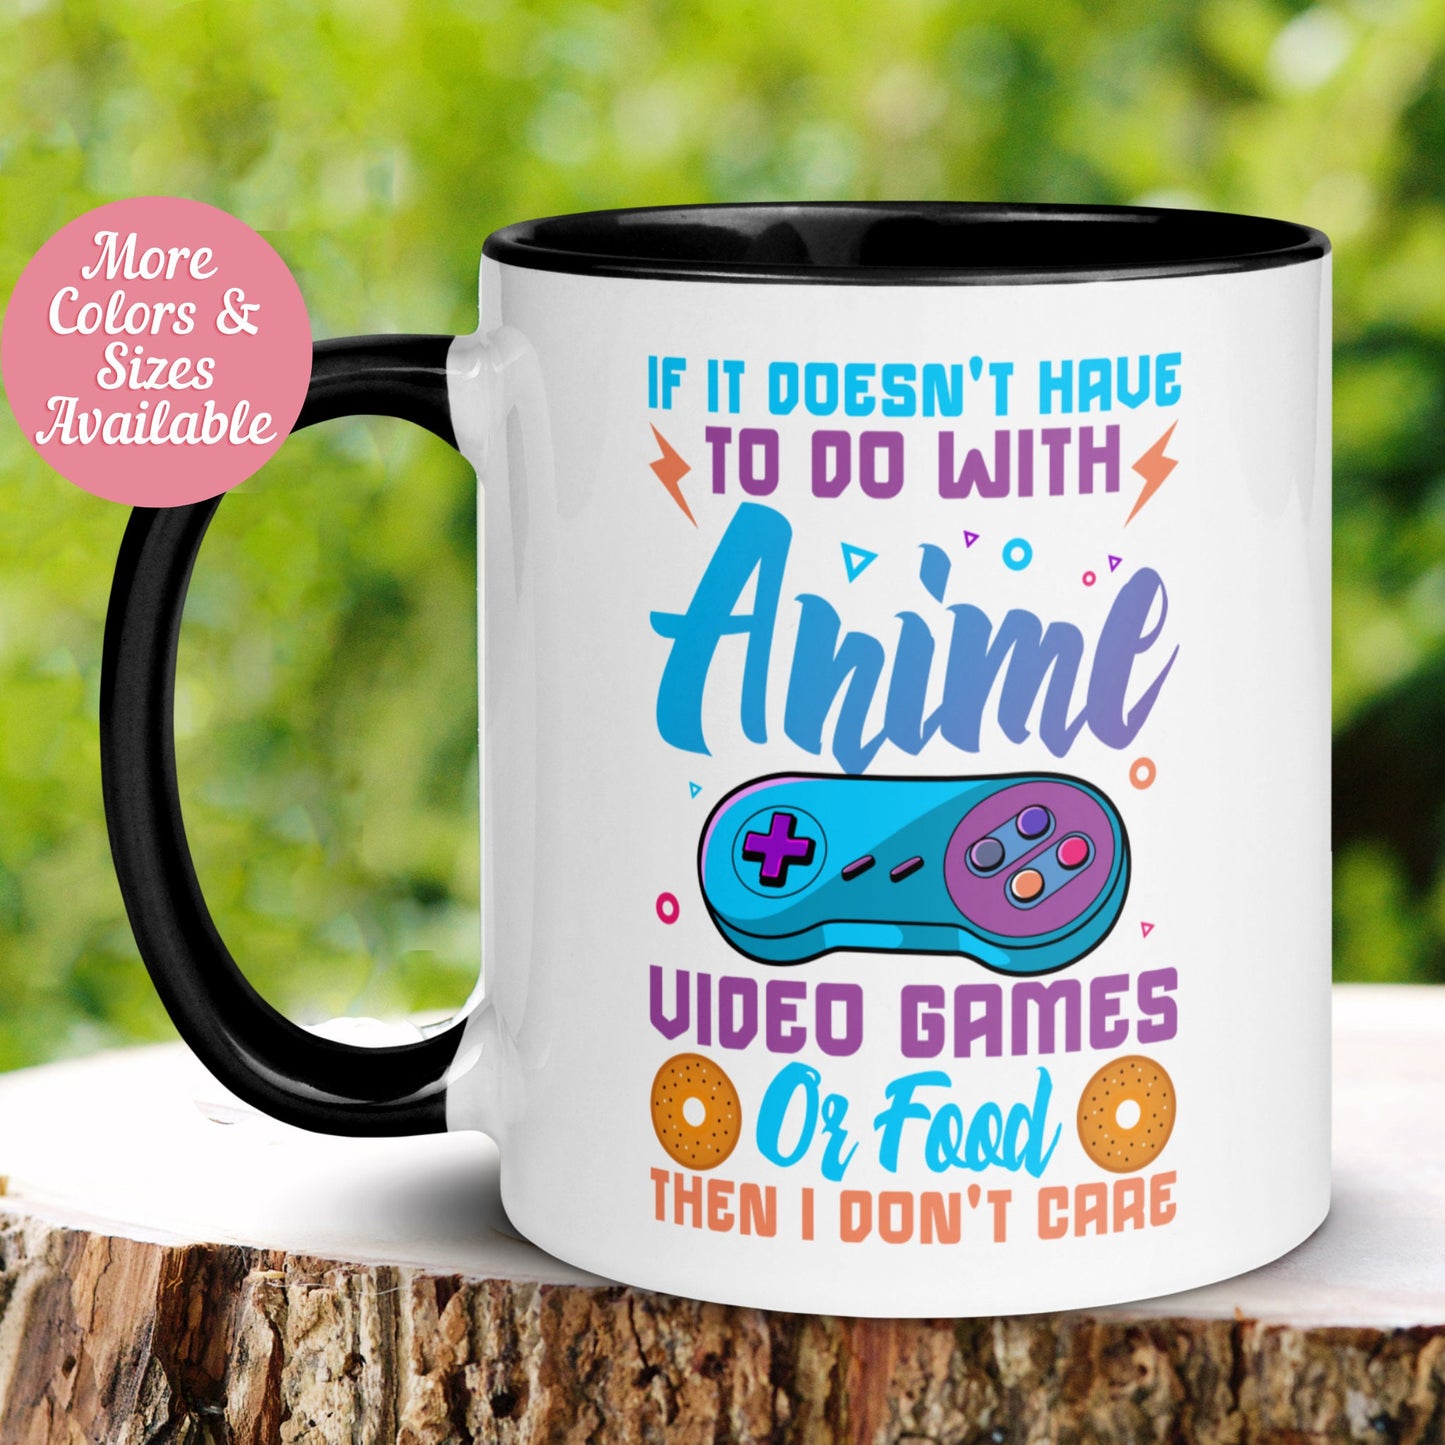 If It Doesn't Have To Do With Anime, Video Games Or Food - Then I Don't Care Mug - Zehnaria - HALLOWEEN - Mugs